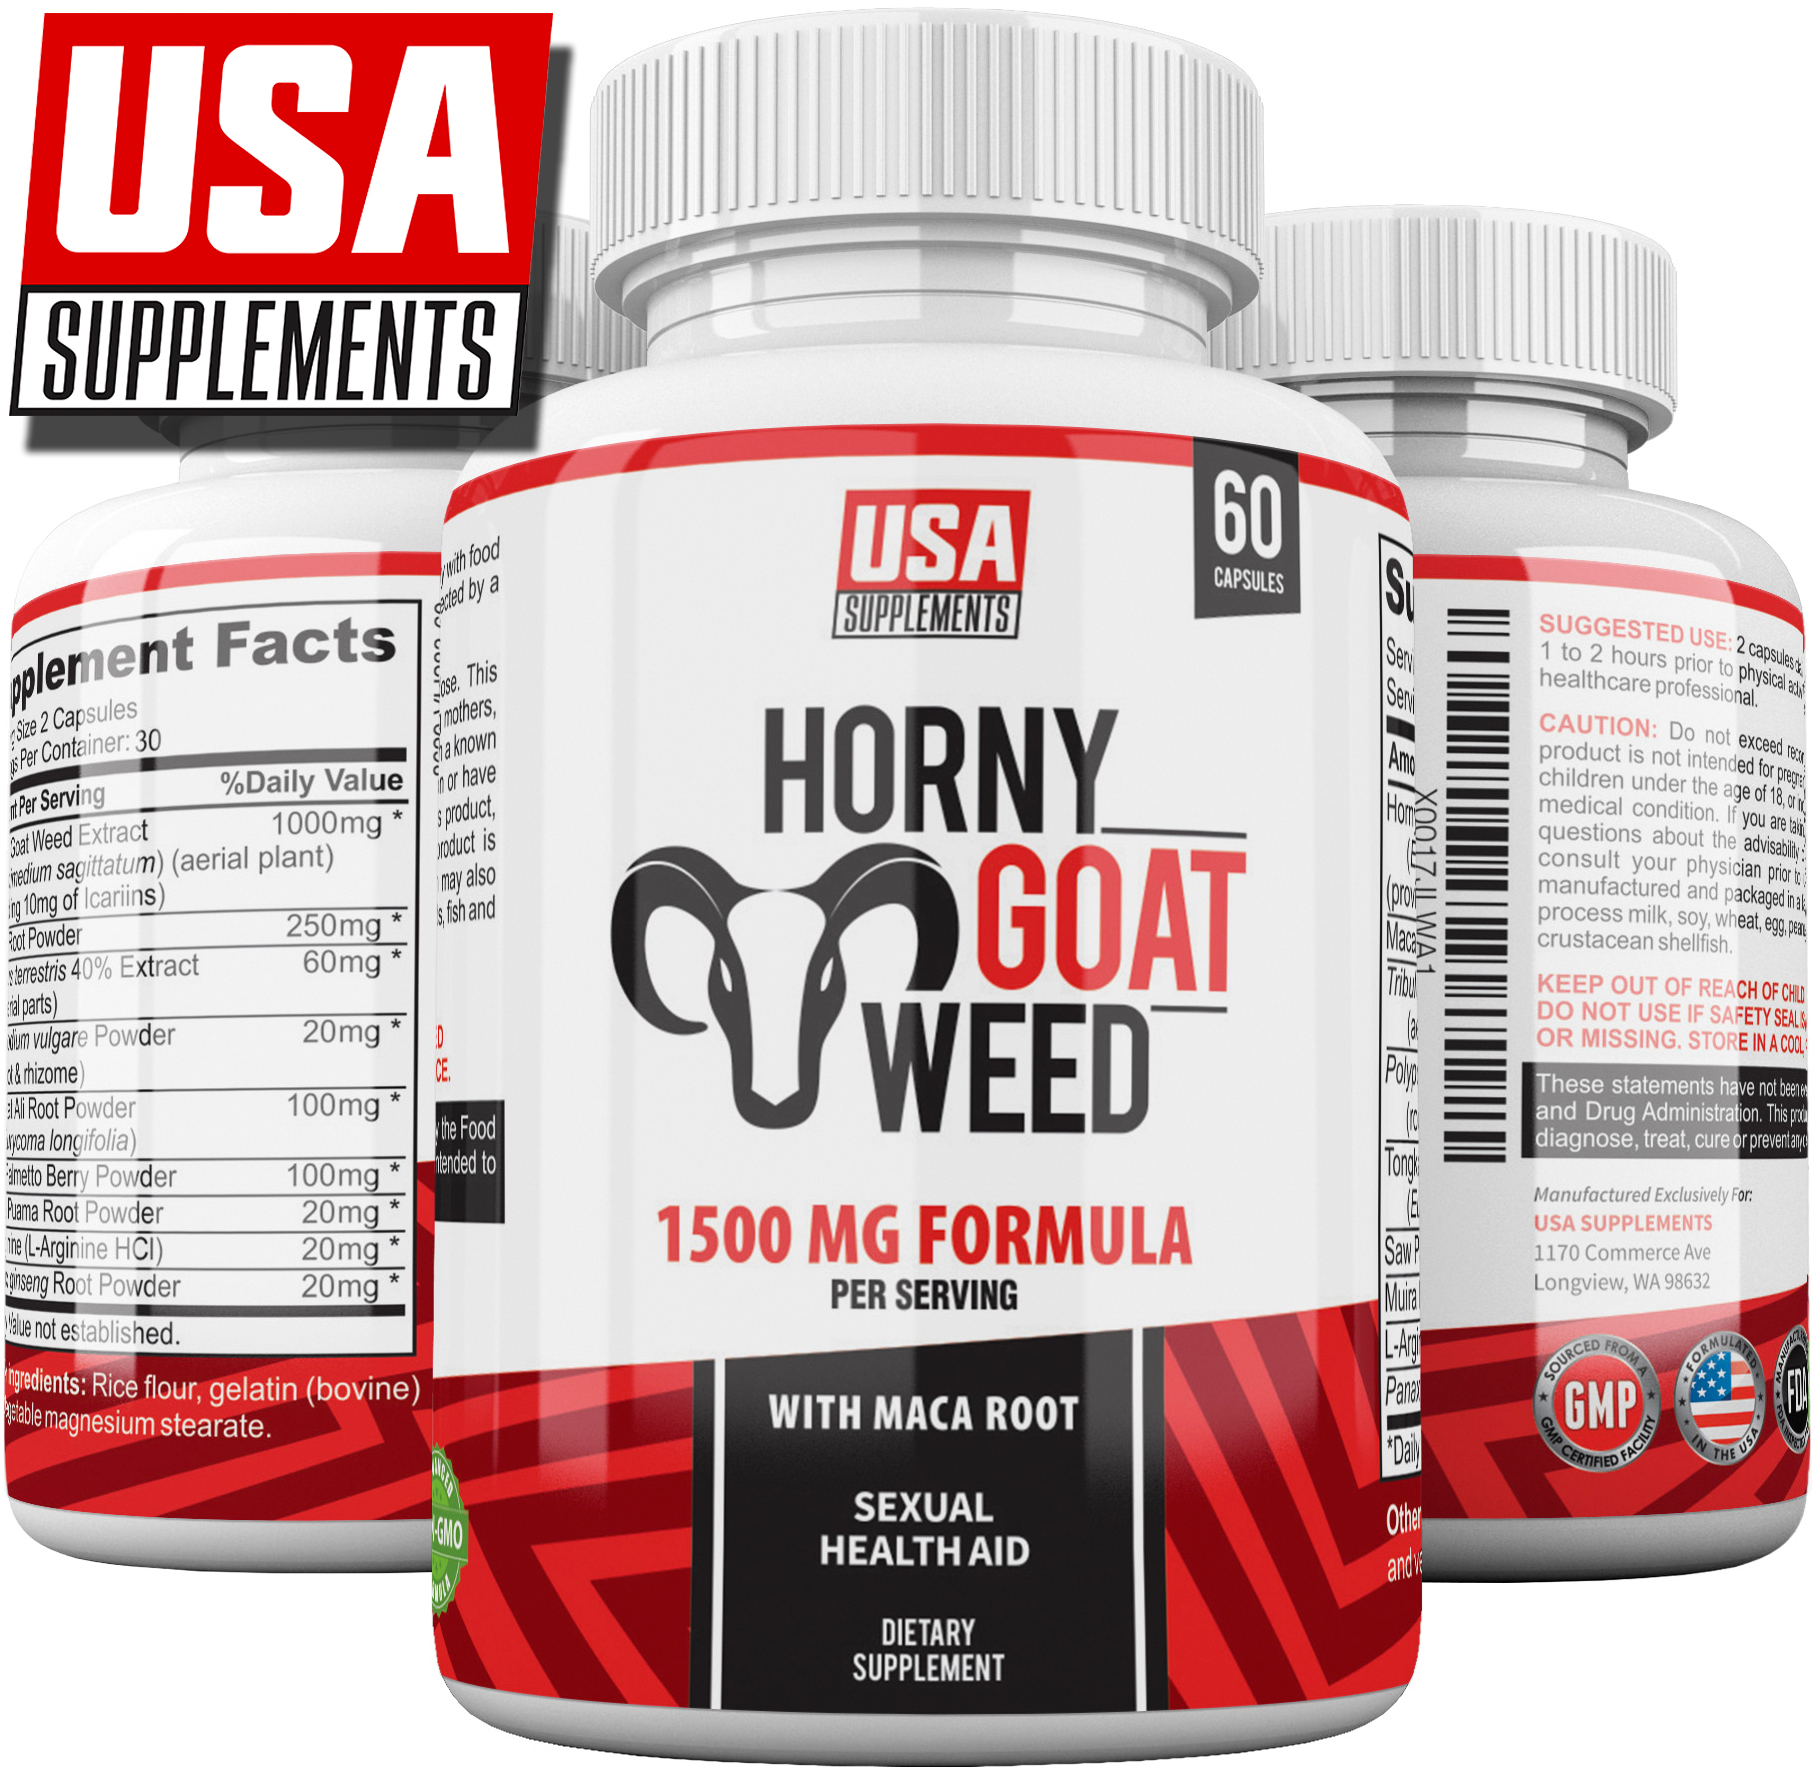 The best Horny Goat Weed for sale on Amazon